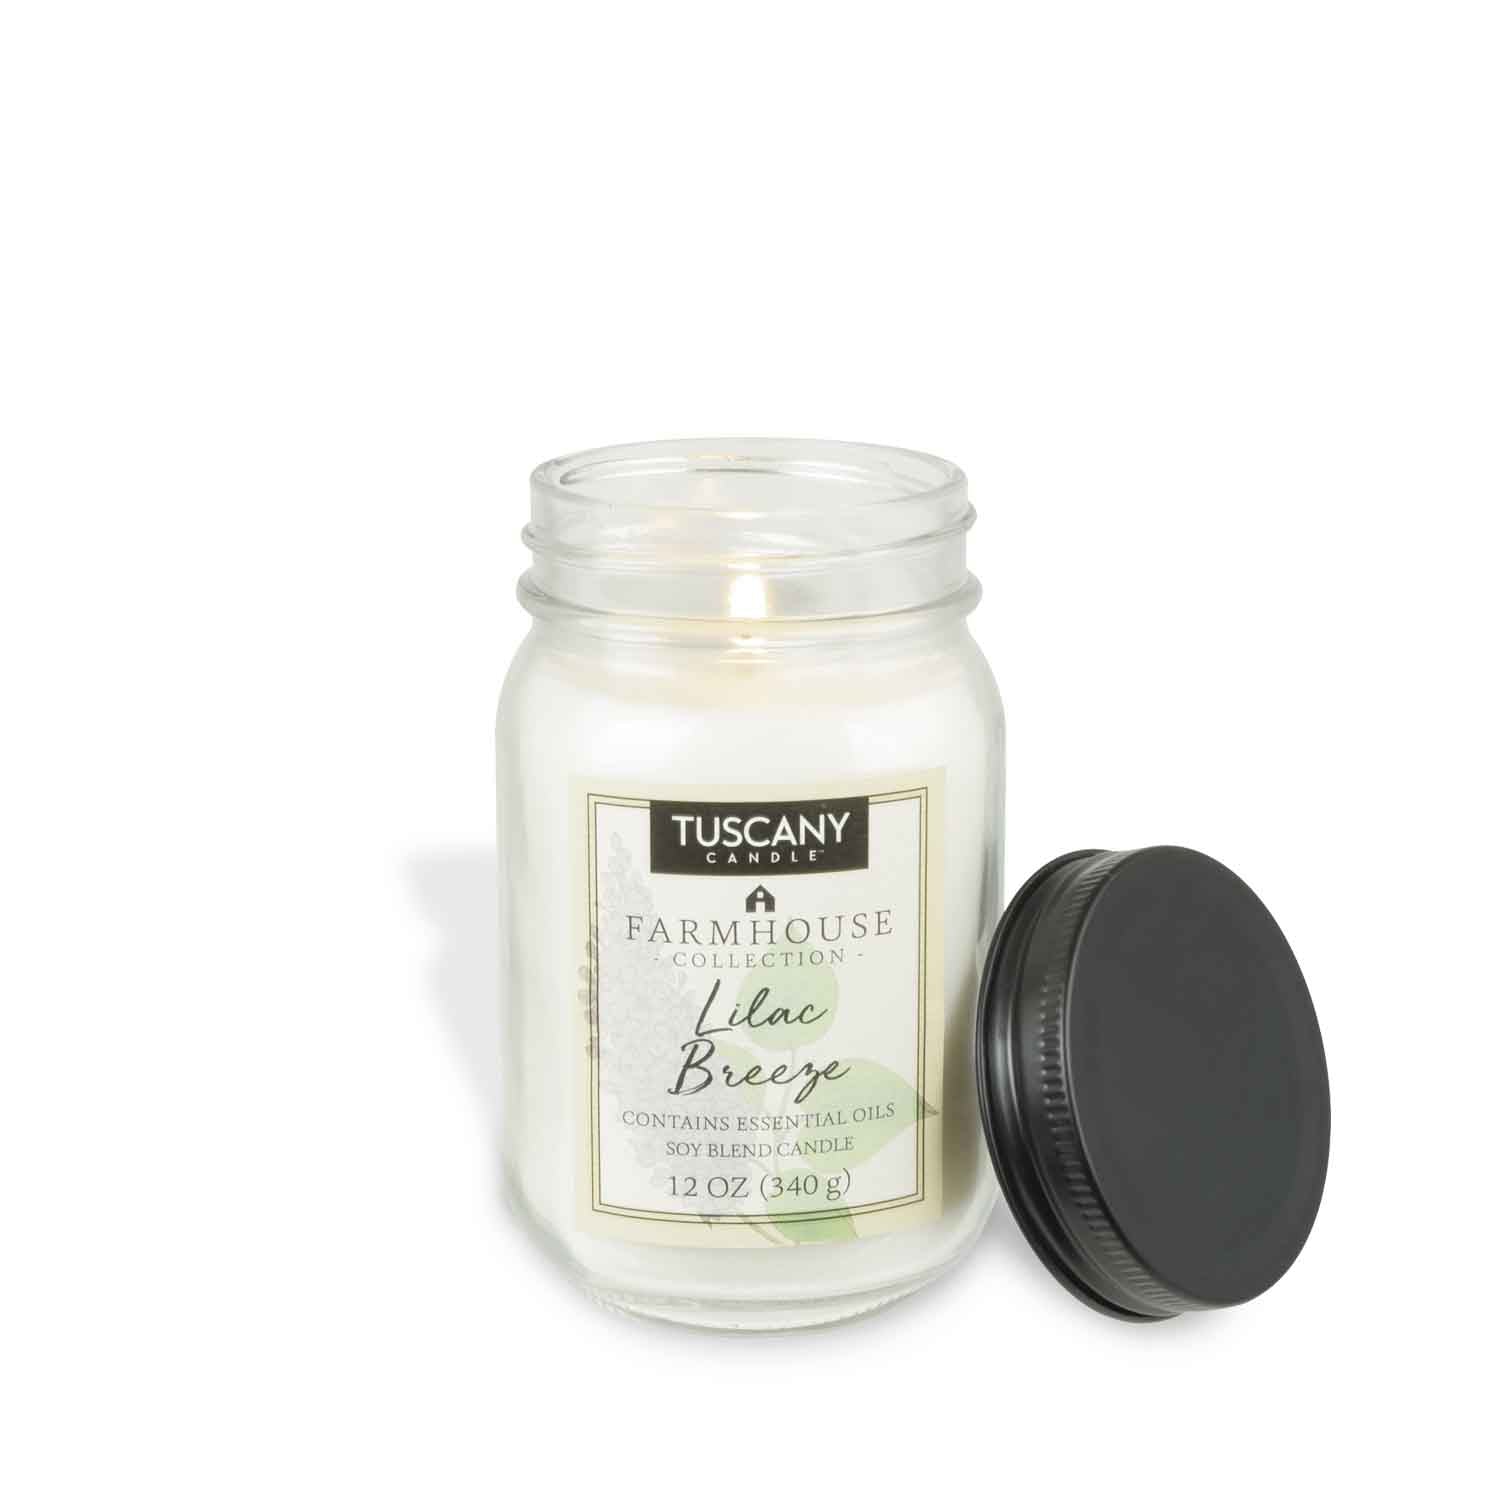 A Lilac Breeze Scented Jar Candle (12 oz) from the Farmhouse Collection, sealed with a lid – Tuscany Candle® EVD.